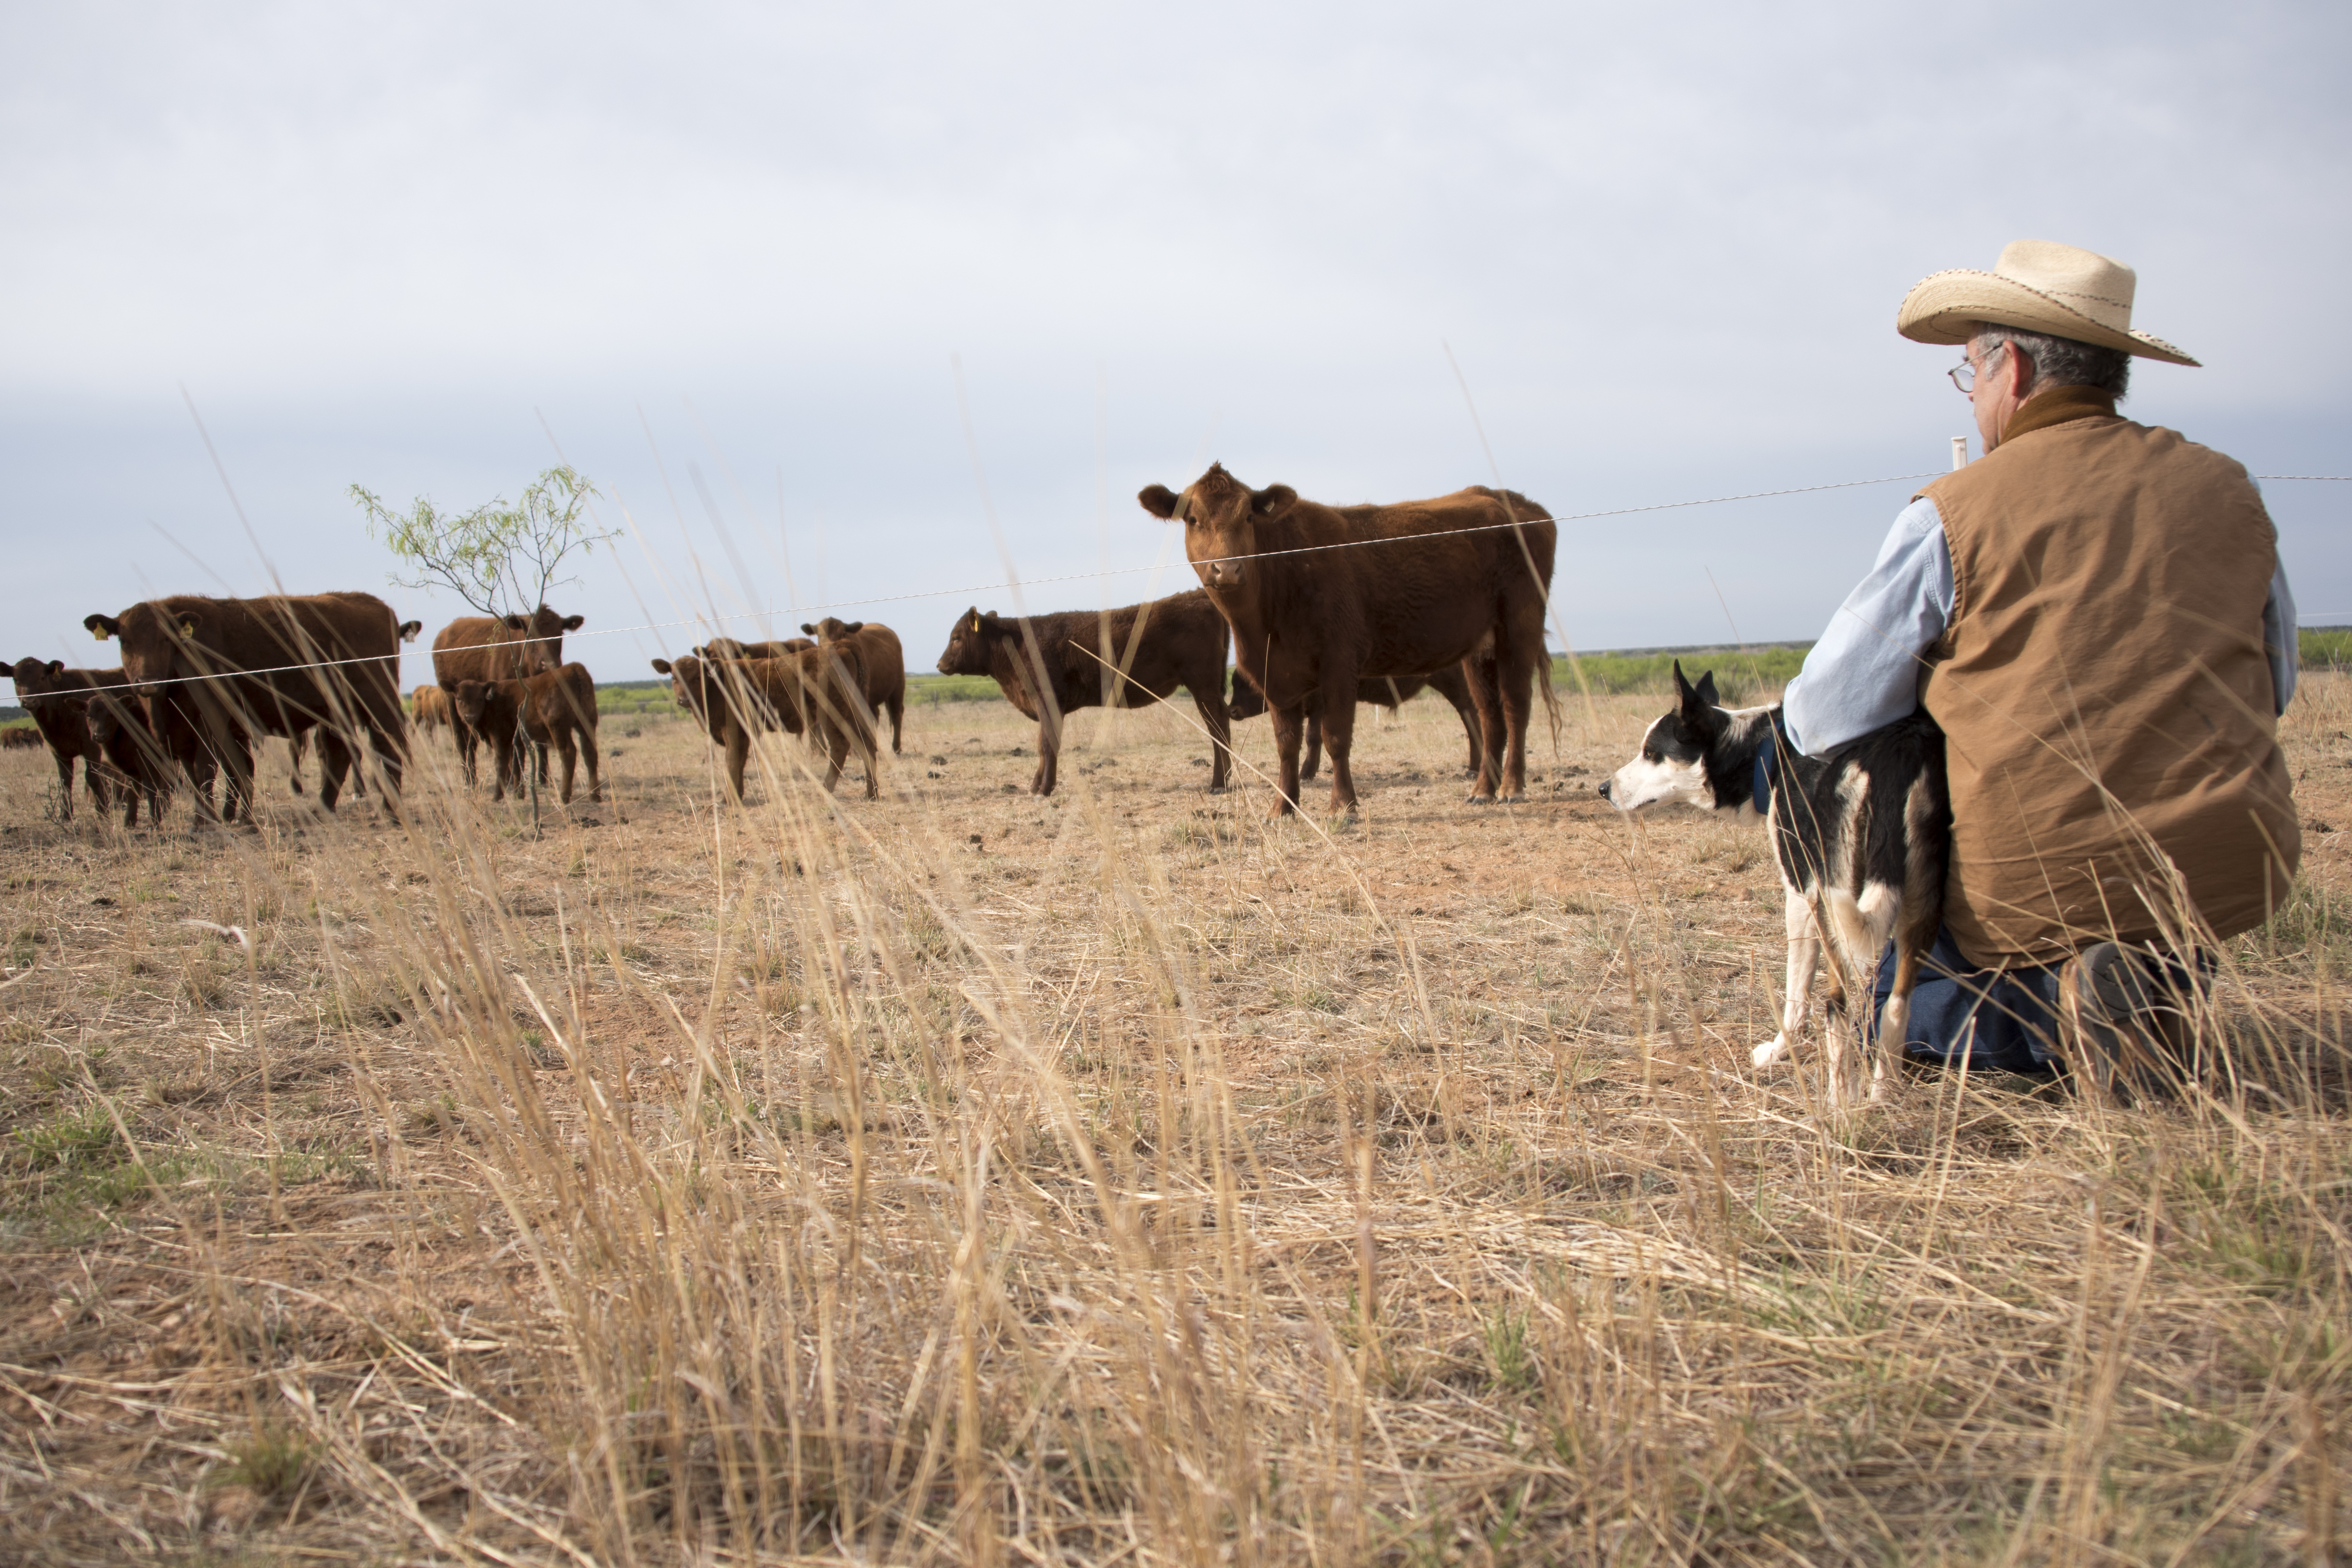 After surviving the drought of the 1950’s and enduring two hard droughts in the past 10 years, developing alternative water sources became critical for Texas rancher Kregg McKenny. Photo Credit: USDA-NRCS